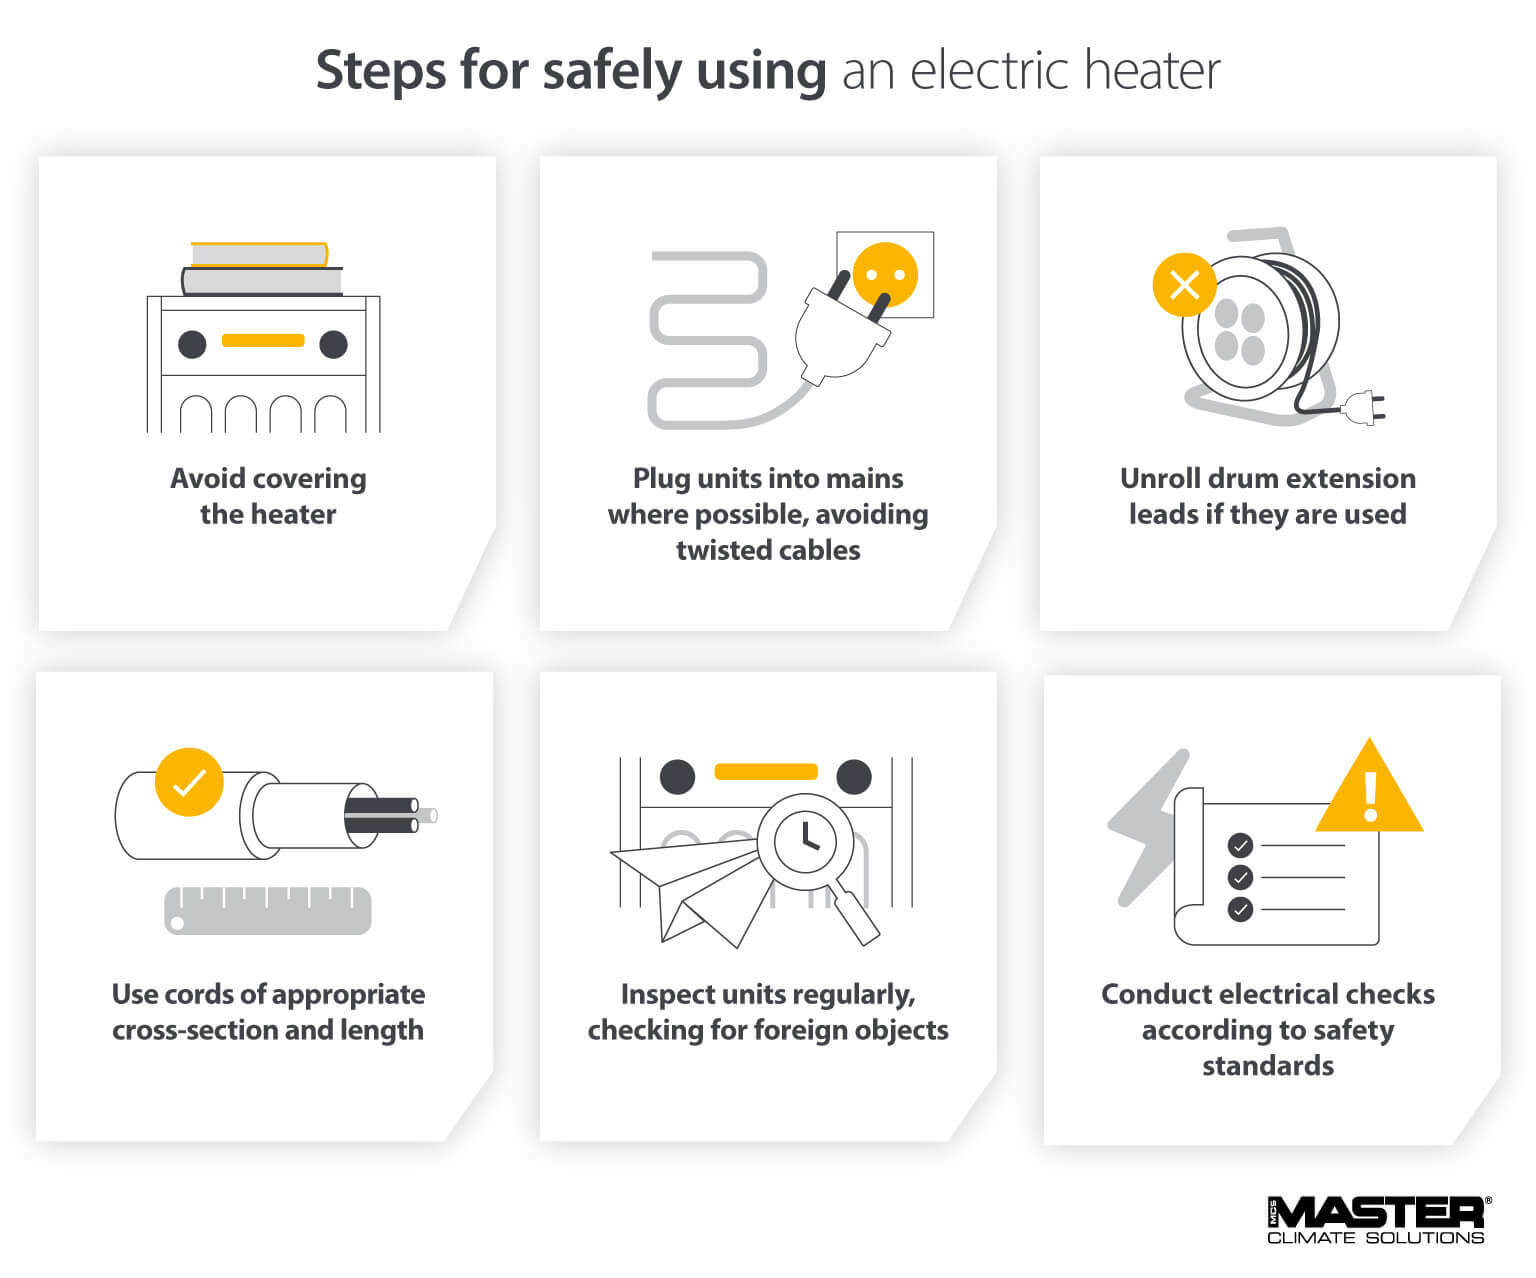 Image showing how to use an electric heater safely